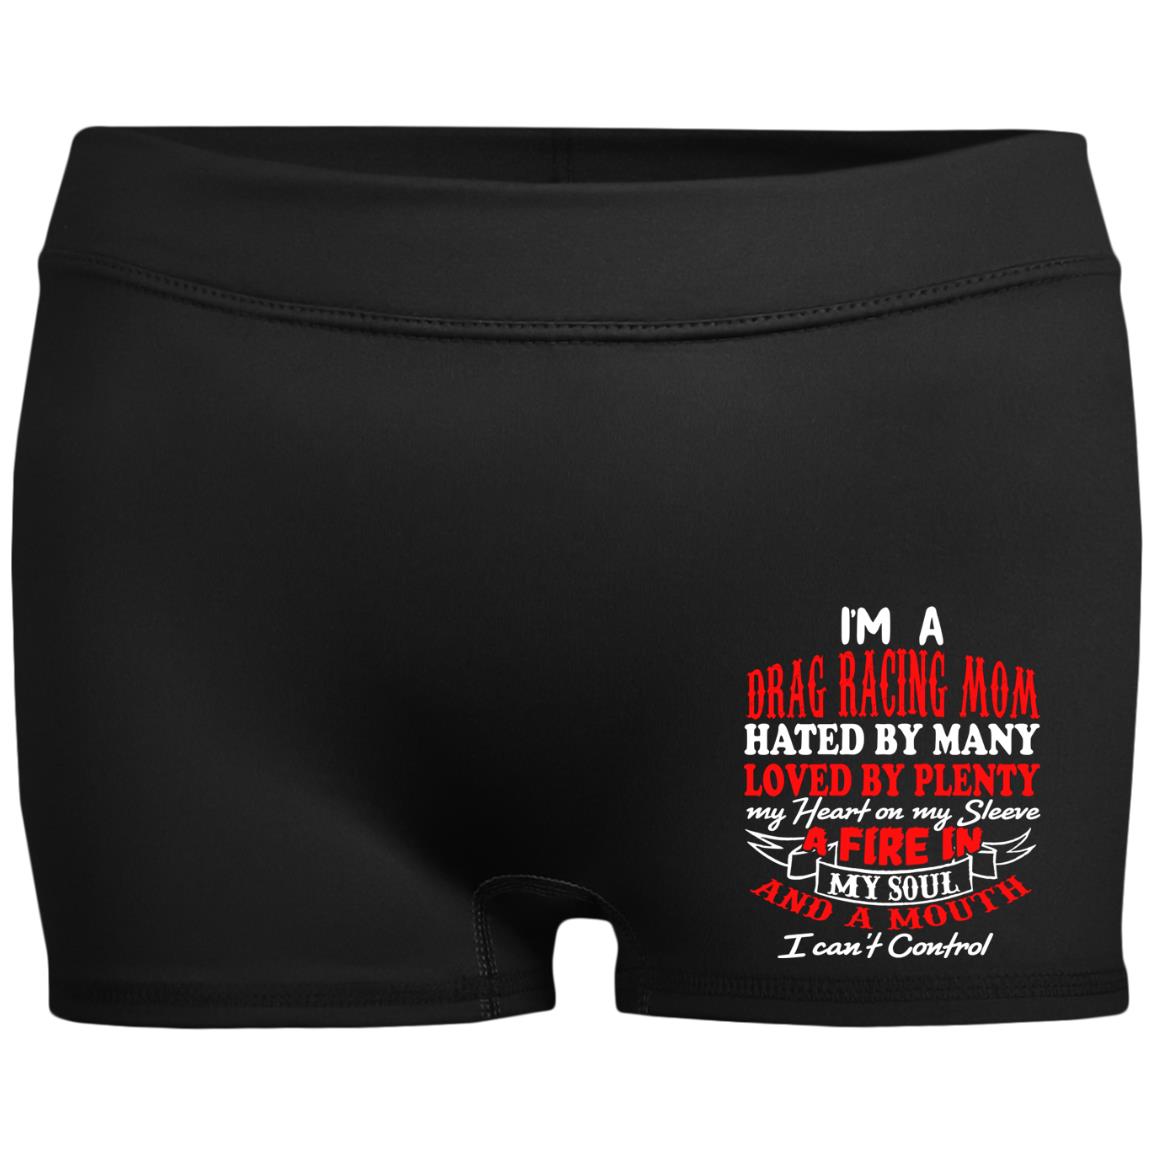 I'm A Drag Racing Mom Hated By Many Loved By Plenty Ladies' Fitted Moisture-Wicking 2.5 inch Inseam Shorts